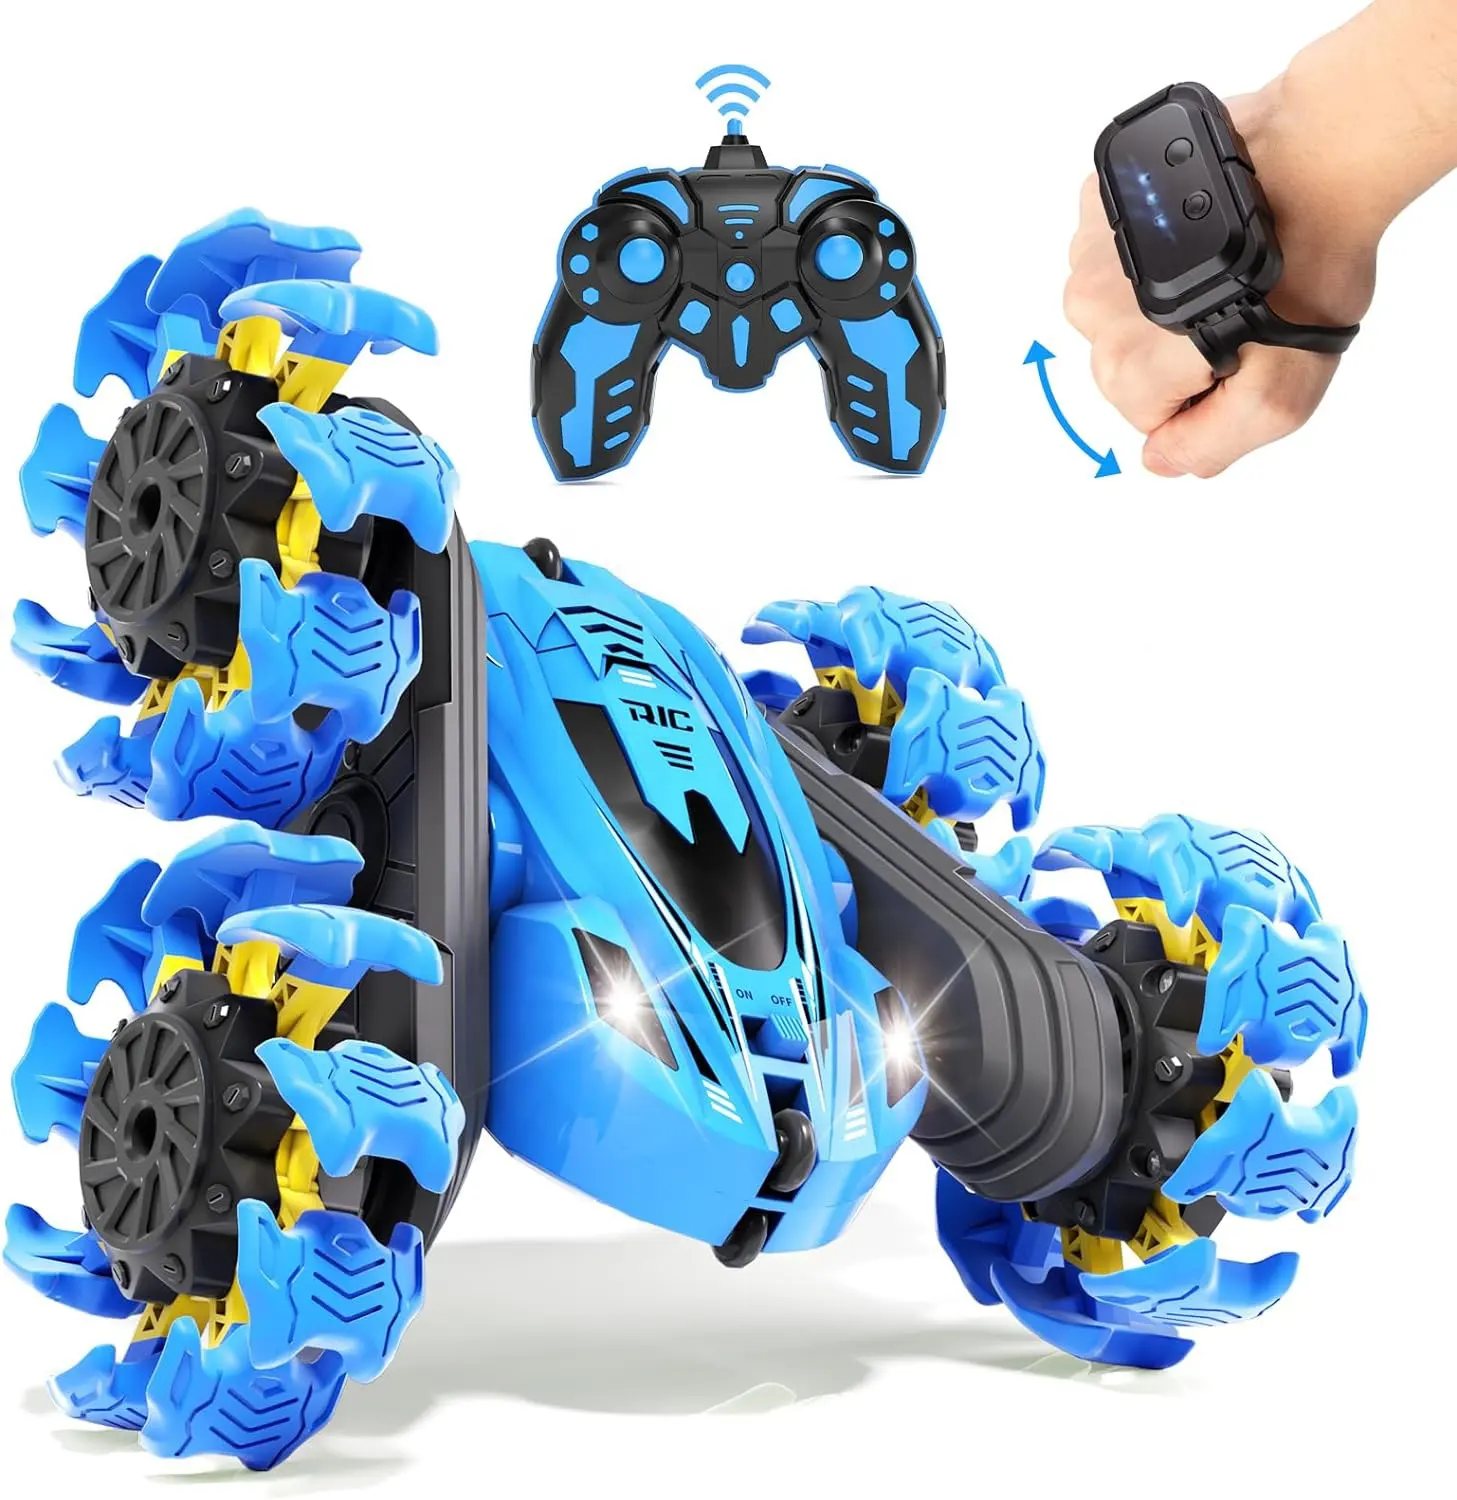 Cross-border hot sale Explosive hotwheels remote control car 2.4 Ghz rc car With Hand Sensor And Controller